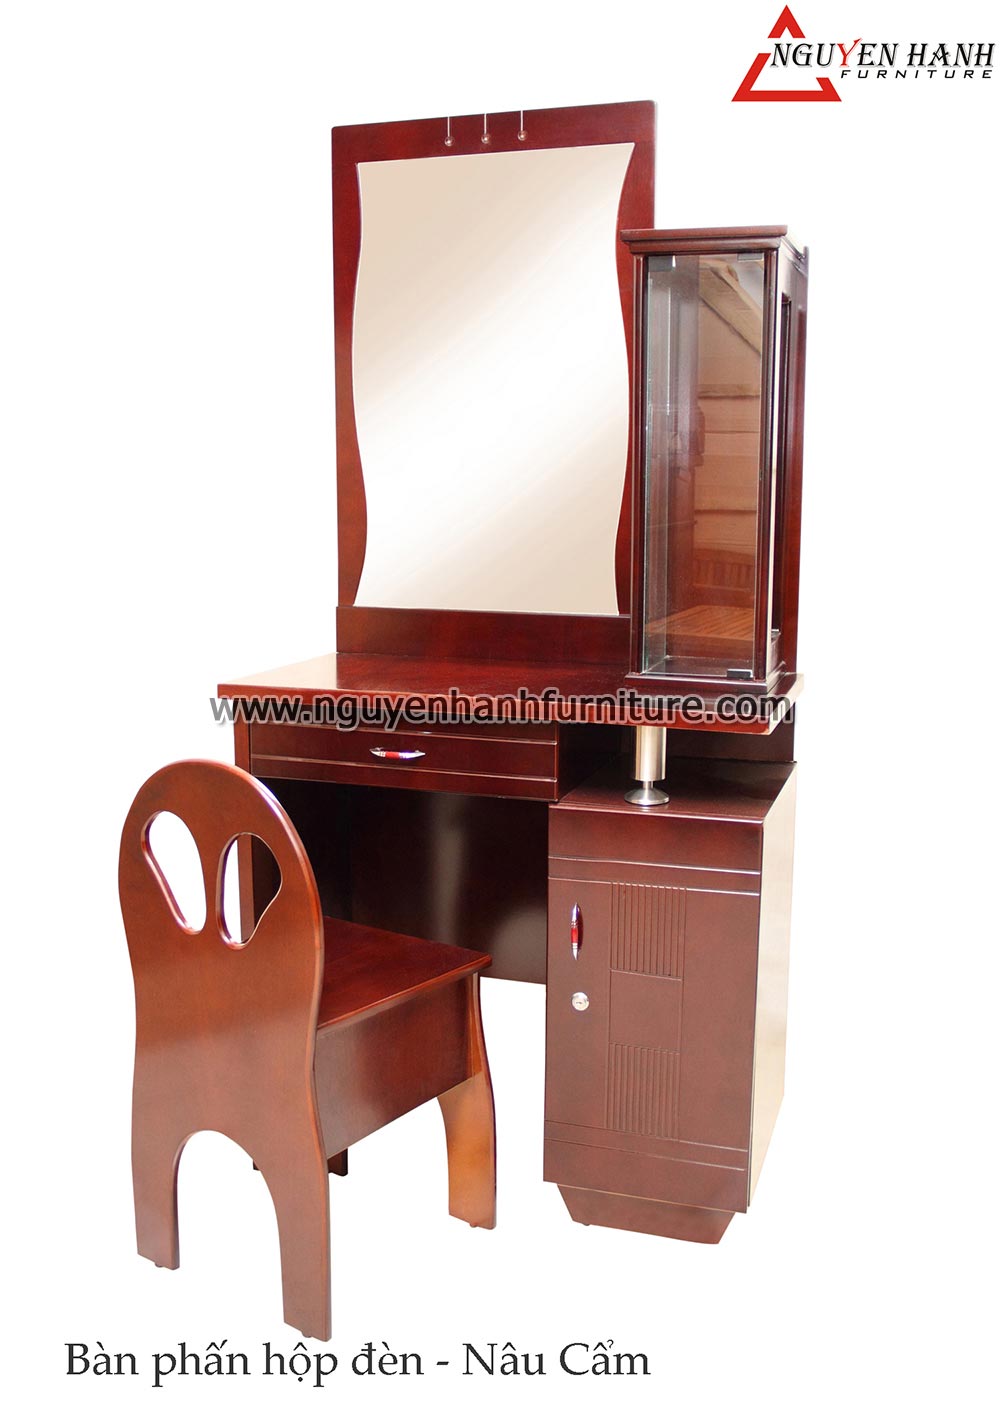 Name product: Brown Light box style Makeup Desk of Rosewood 